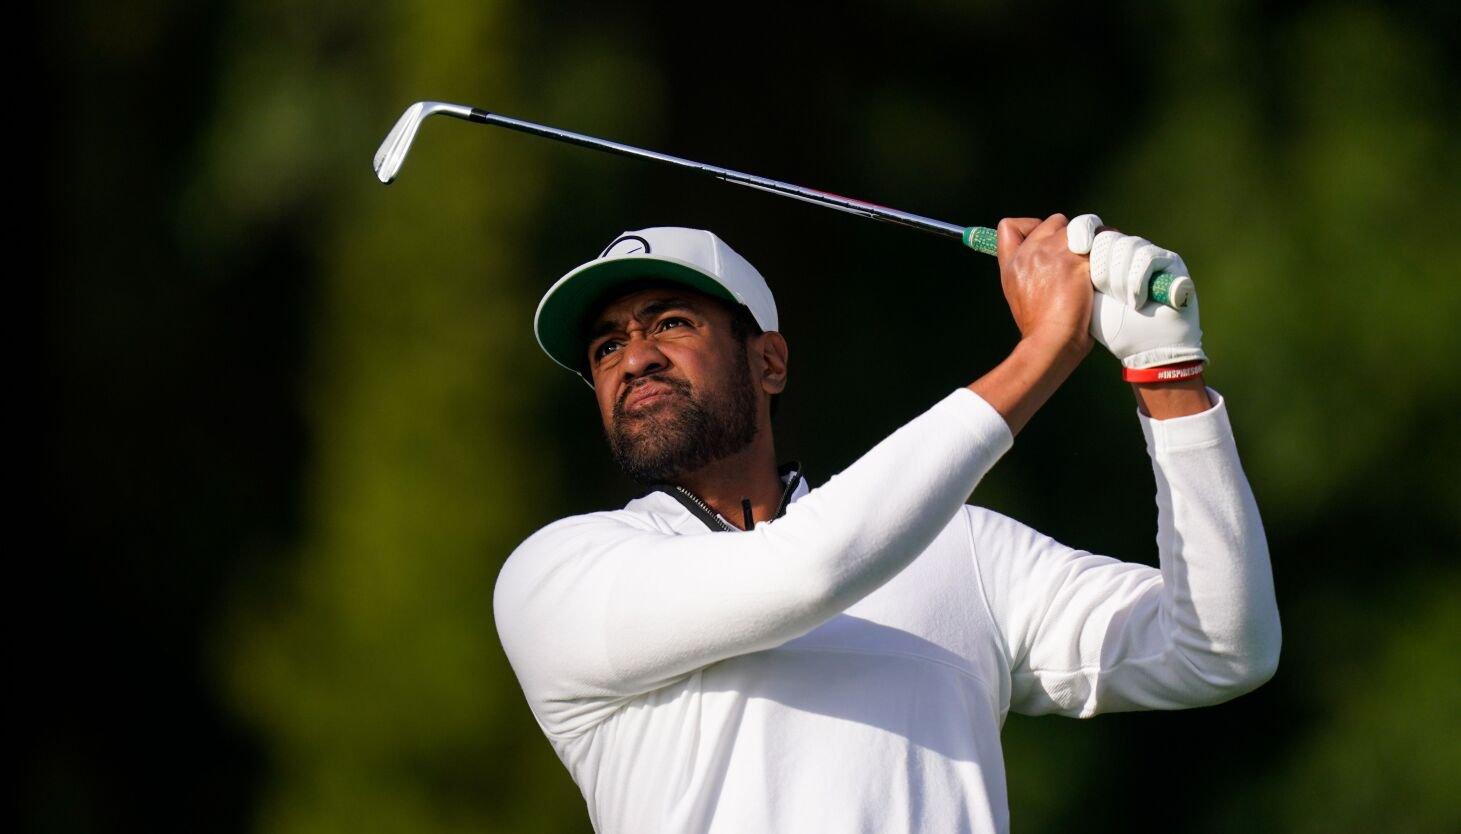 2022 FedEx St. Jude Championship Betting: Can Finau Win Back-to-Back Titles?